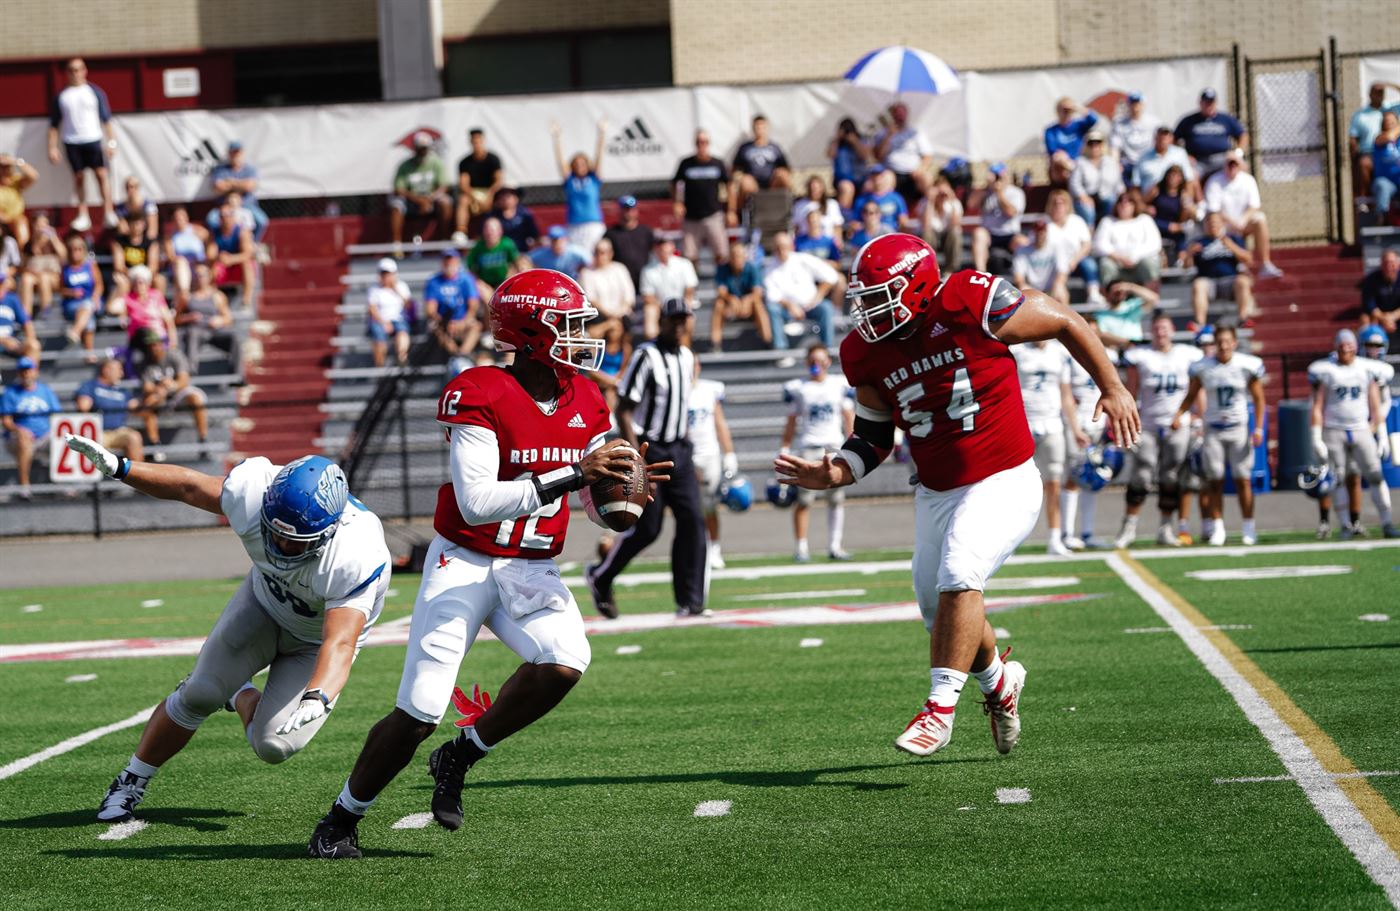 Fifth-year senior quarterback and captain Ja'Quill Burch evades a Salve Regina defender and looks downfield to pass. Photo courtesy of David Venezia